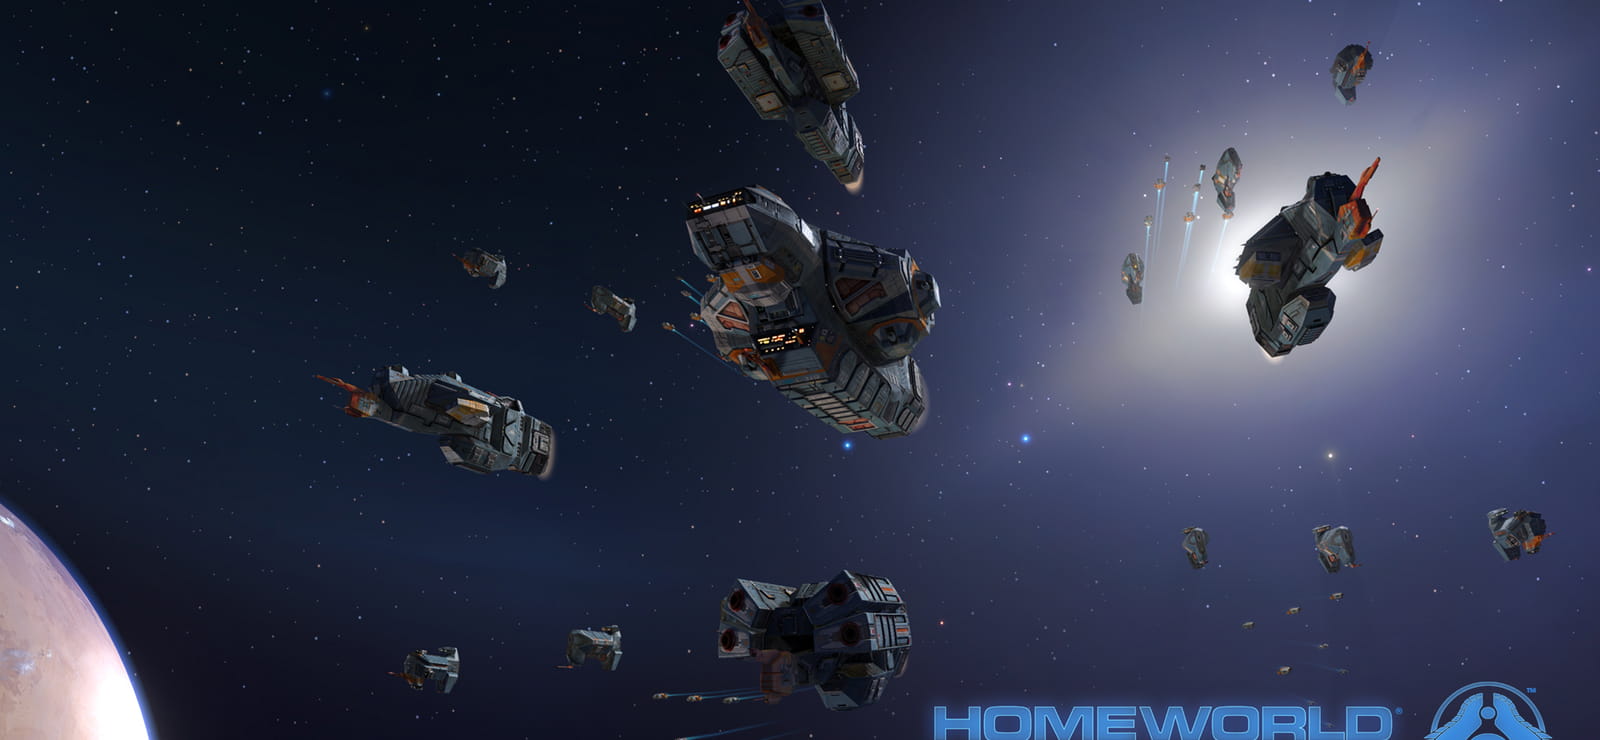 Homeworld® Remastered Collection